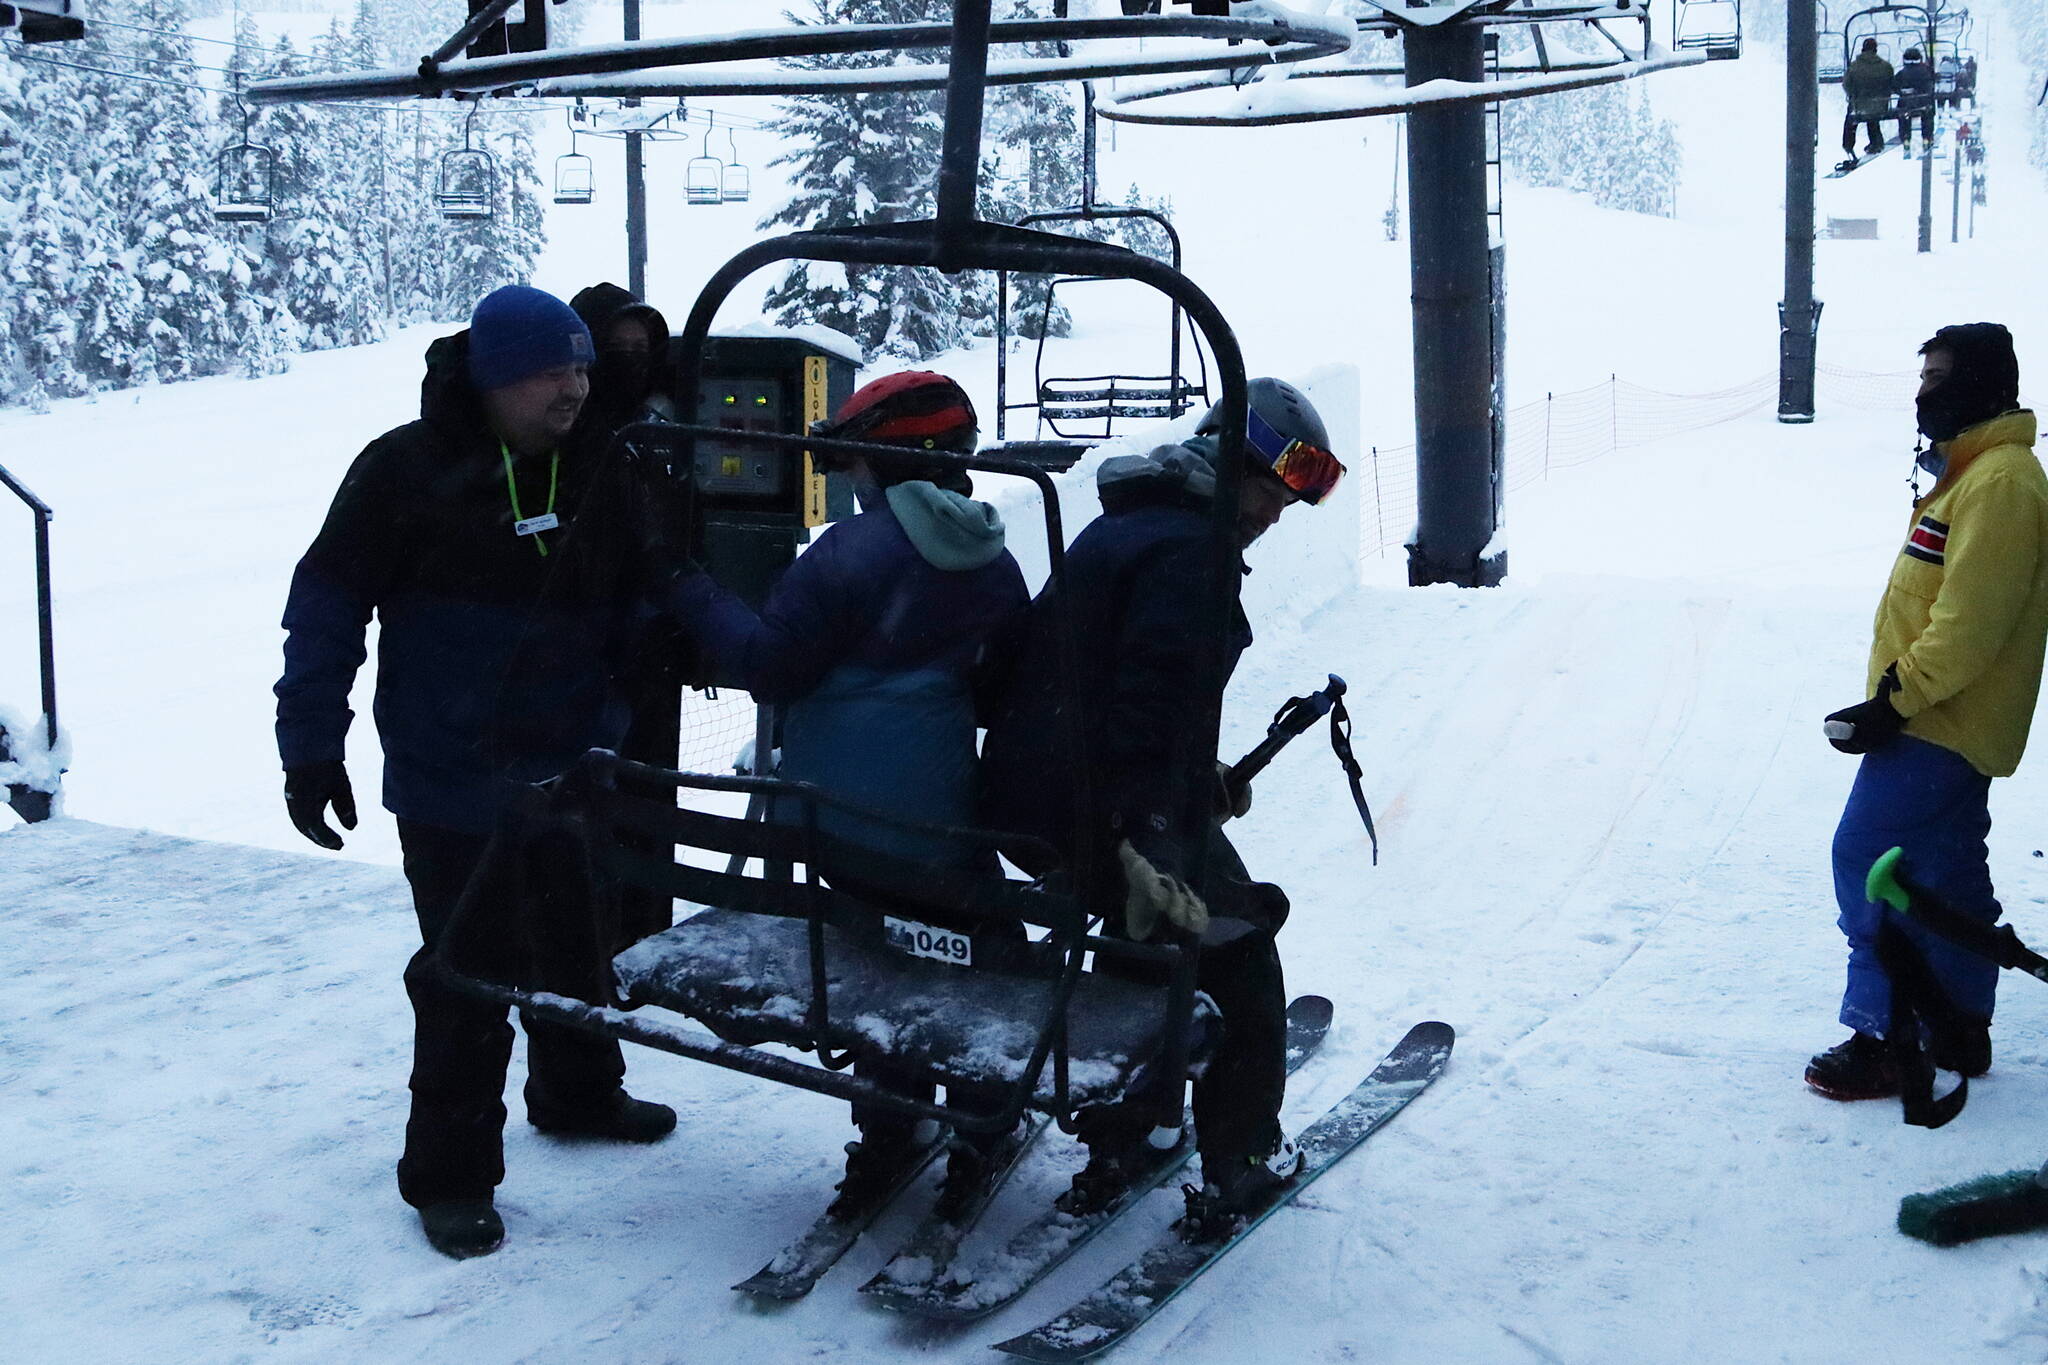 An Eaglecrest Ski Area lift operator helps skiers on Dec. 20. A study published earlier this month states the average wage of $13.06 for Eaglecrest lift operators and attendants is 25% below the average at U.S. ski resorts. (Mark Sabbatini / Juneau Empire file photo)